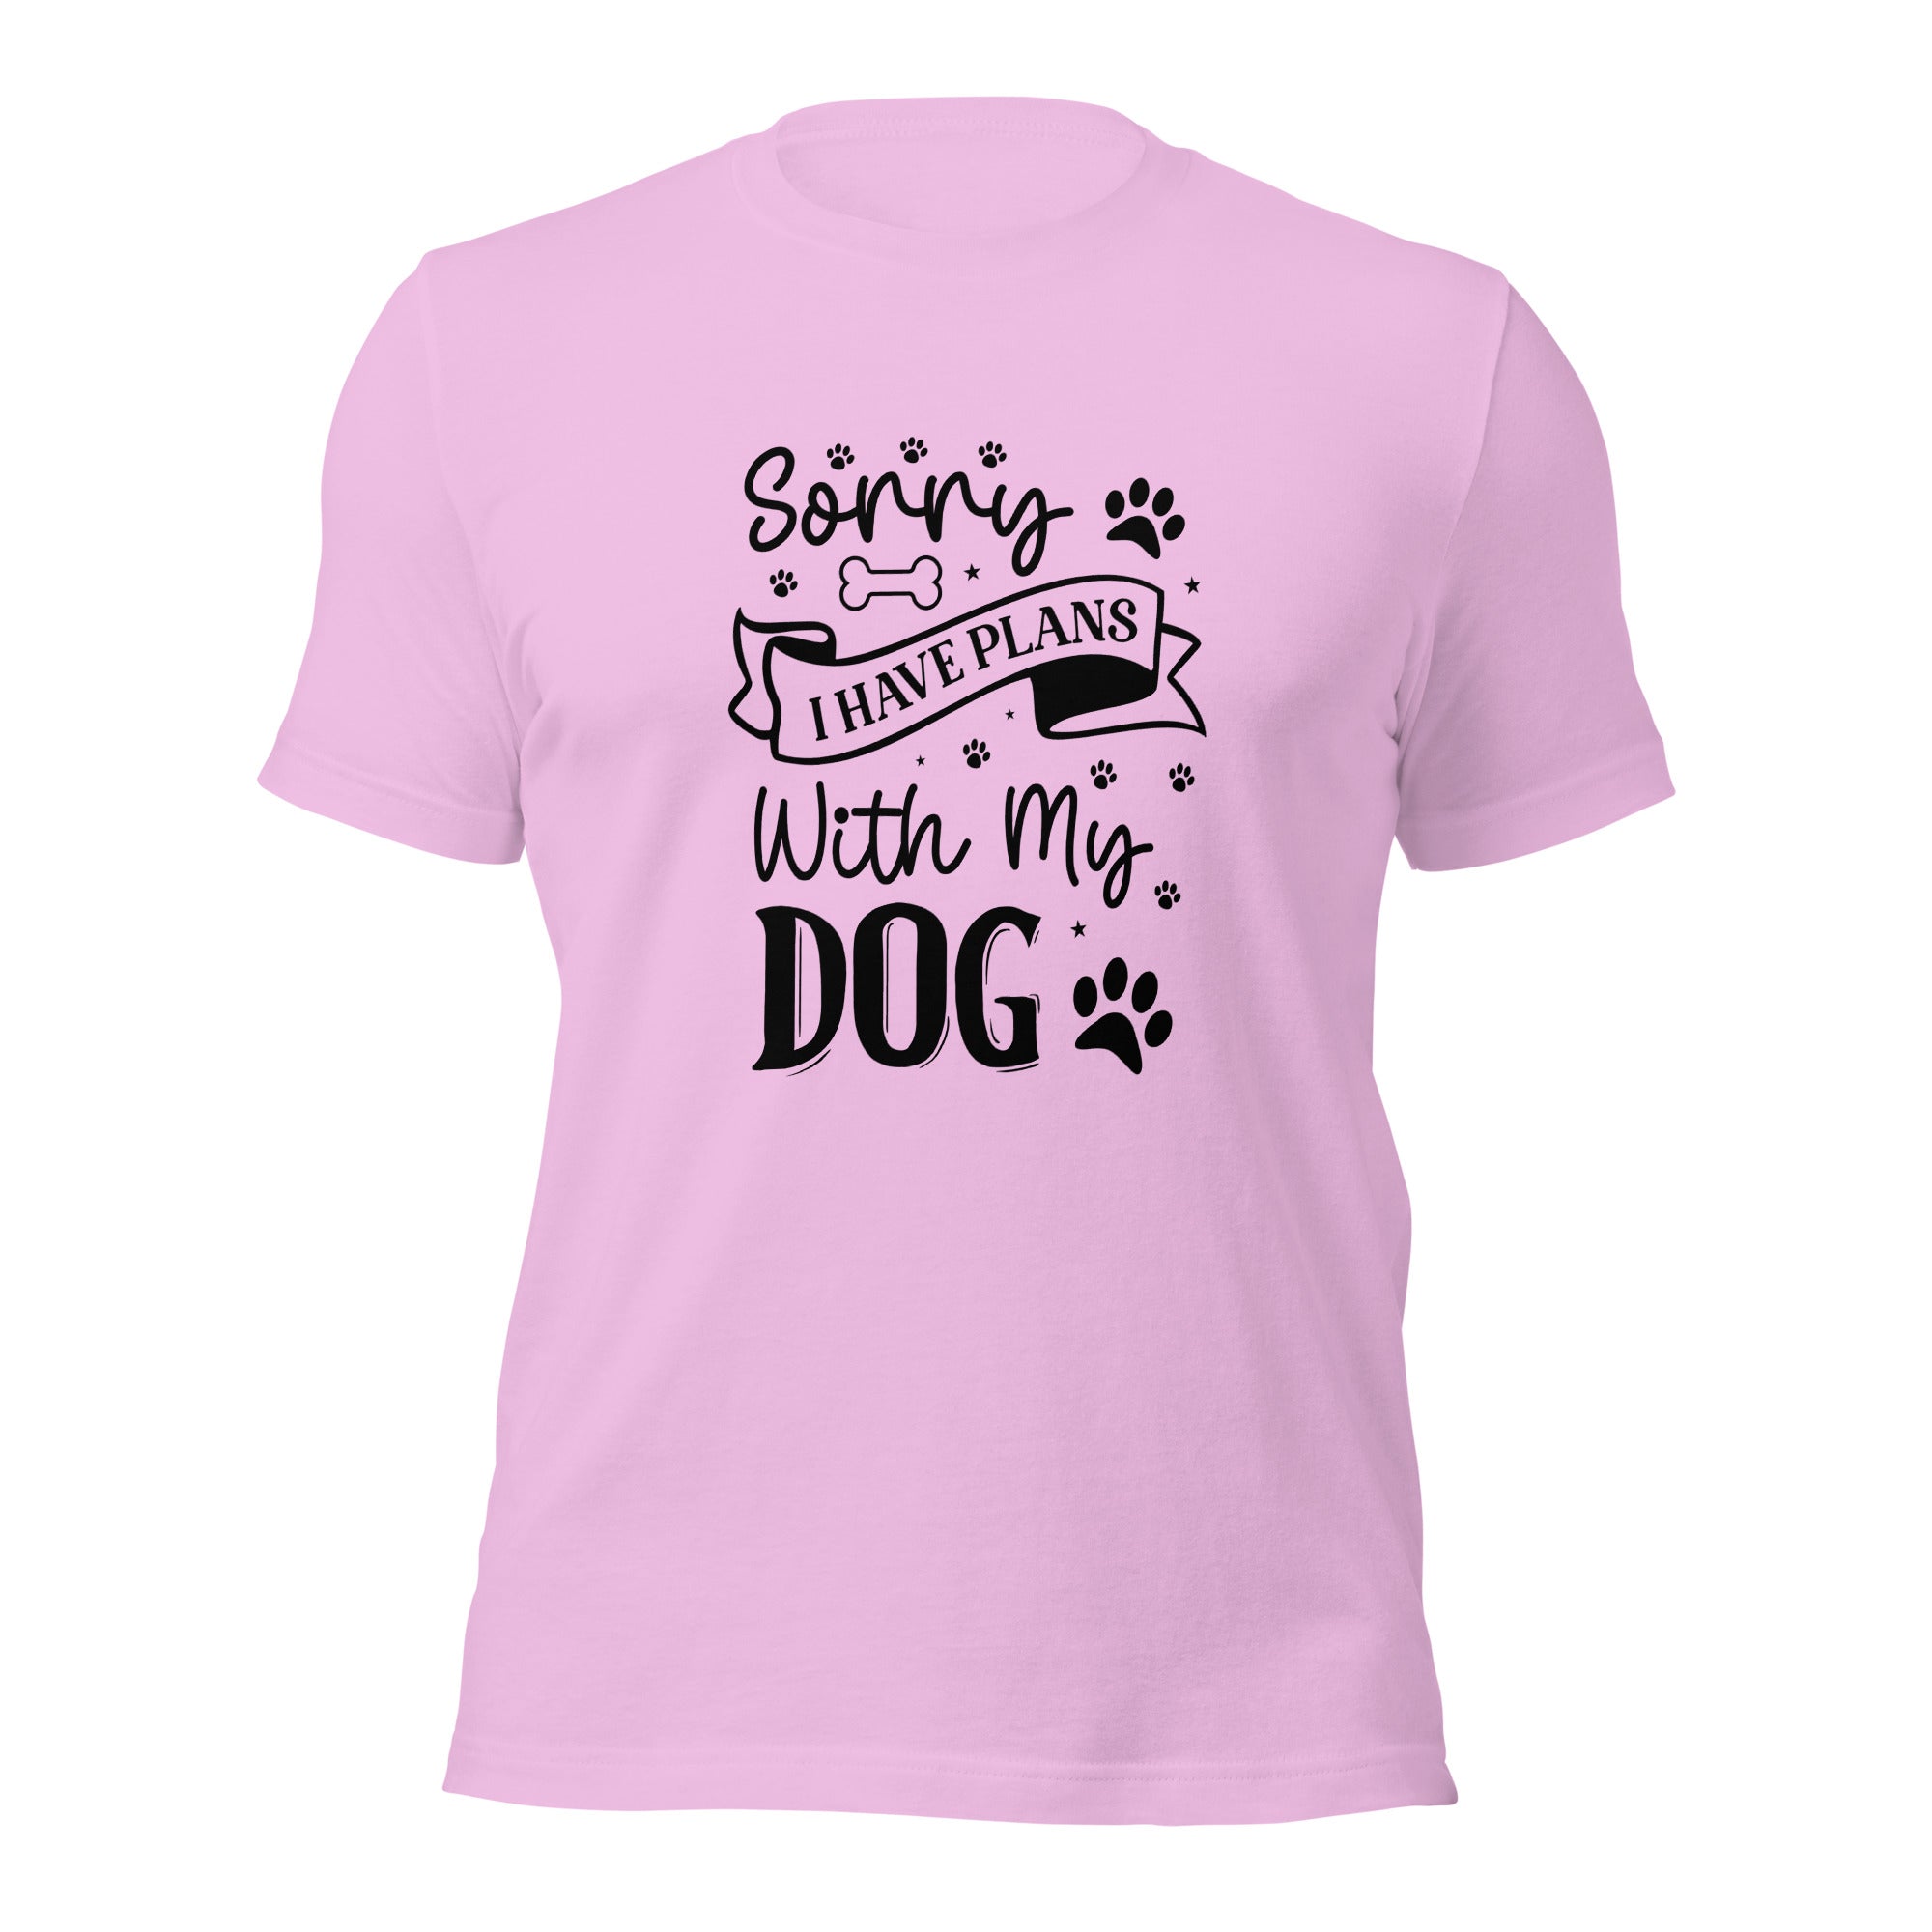 Unisex t-shirt- Sorry I Have Plans With My Dog